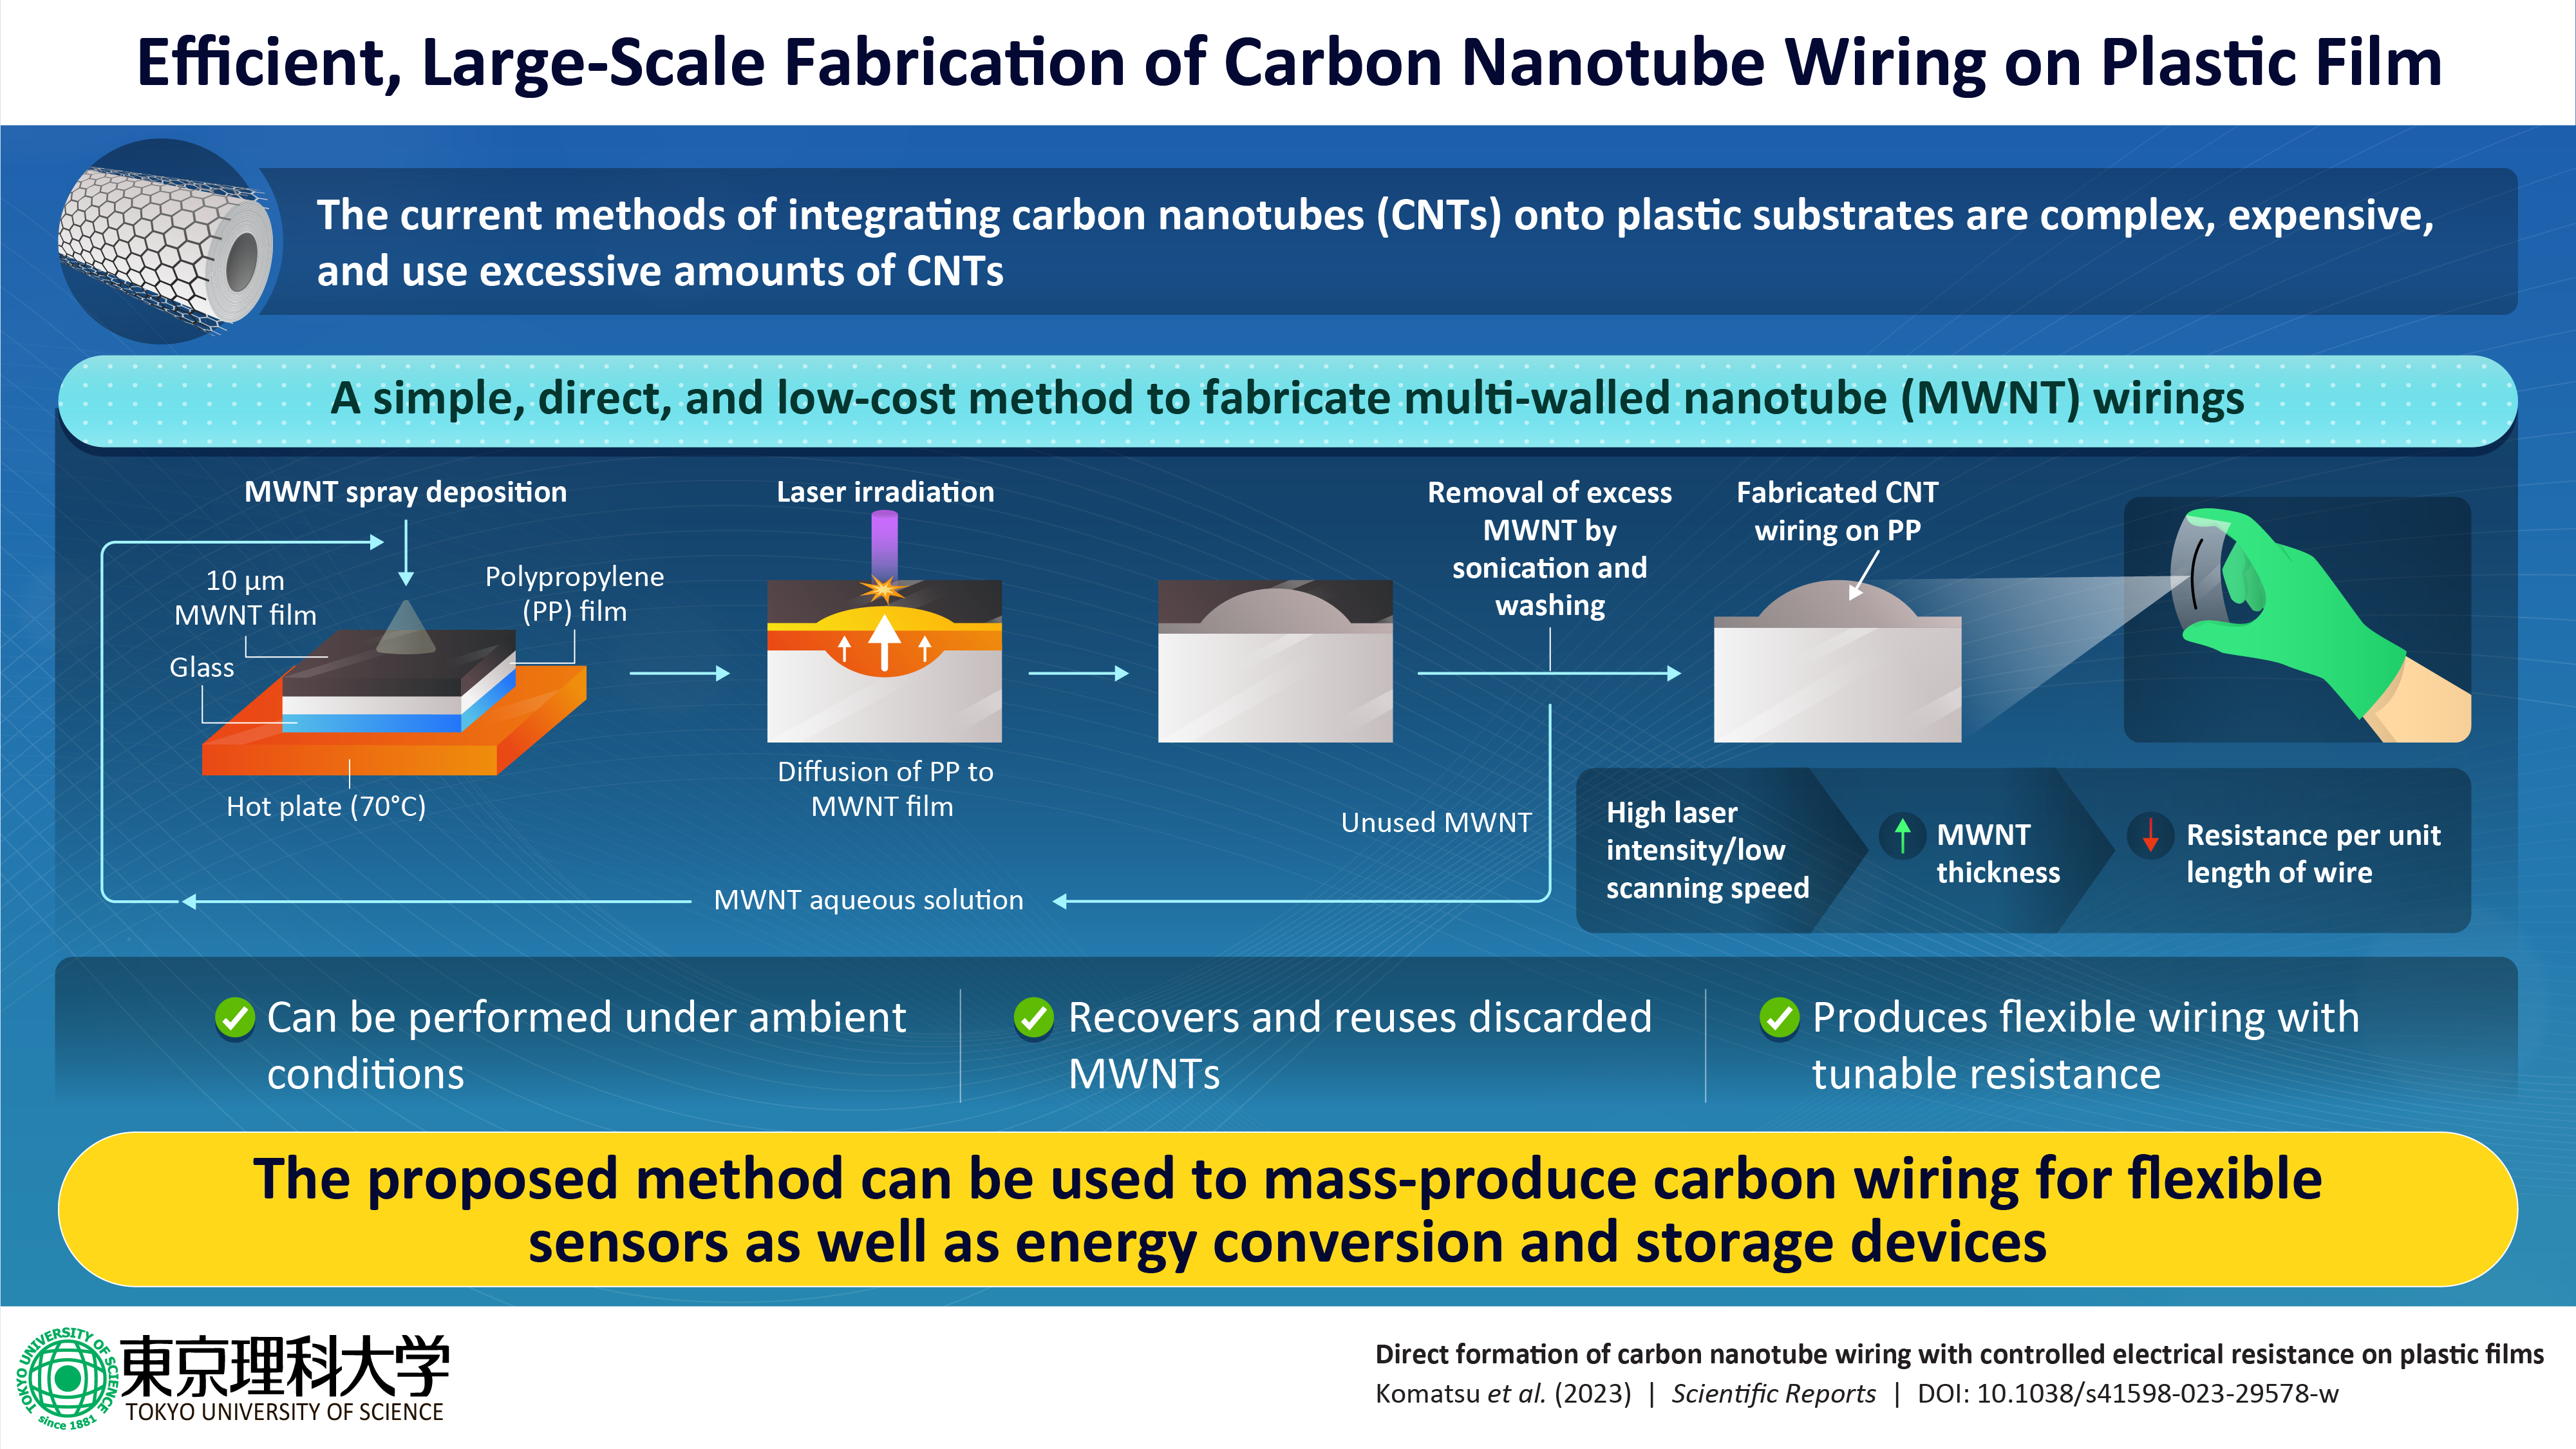 TUS Researchers Propose a Simple, Inexpensive Approach to Fabricating Carbon Nanotube Wiring on Plastic Films